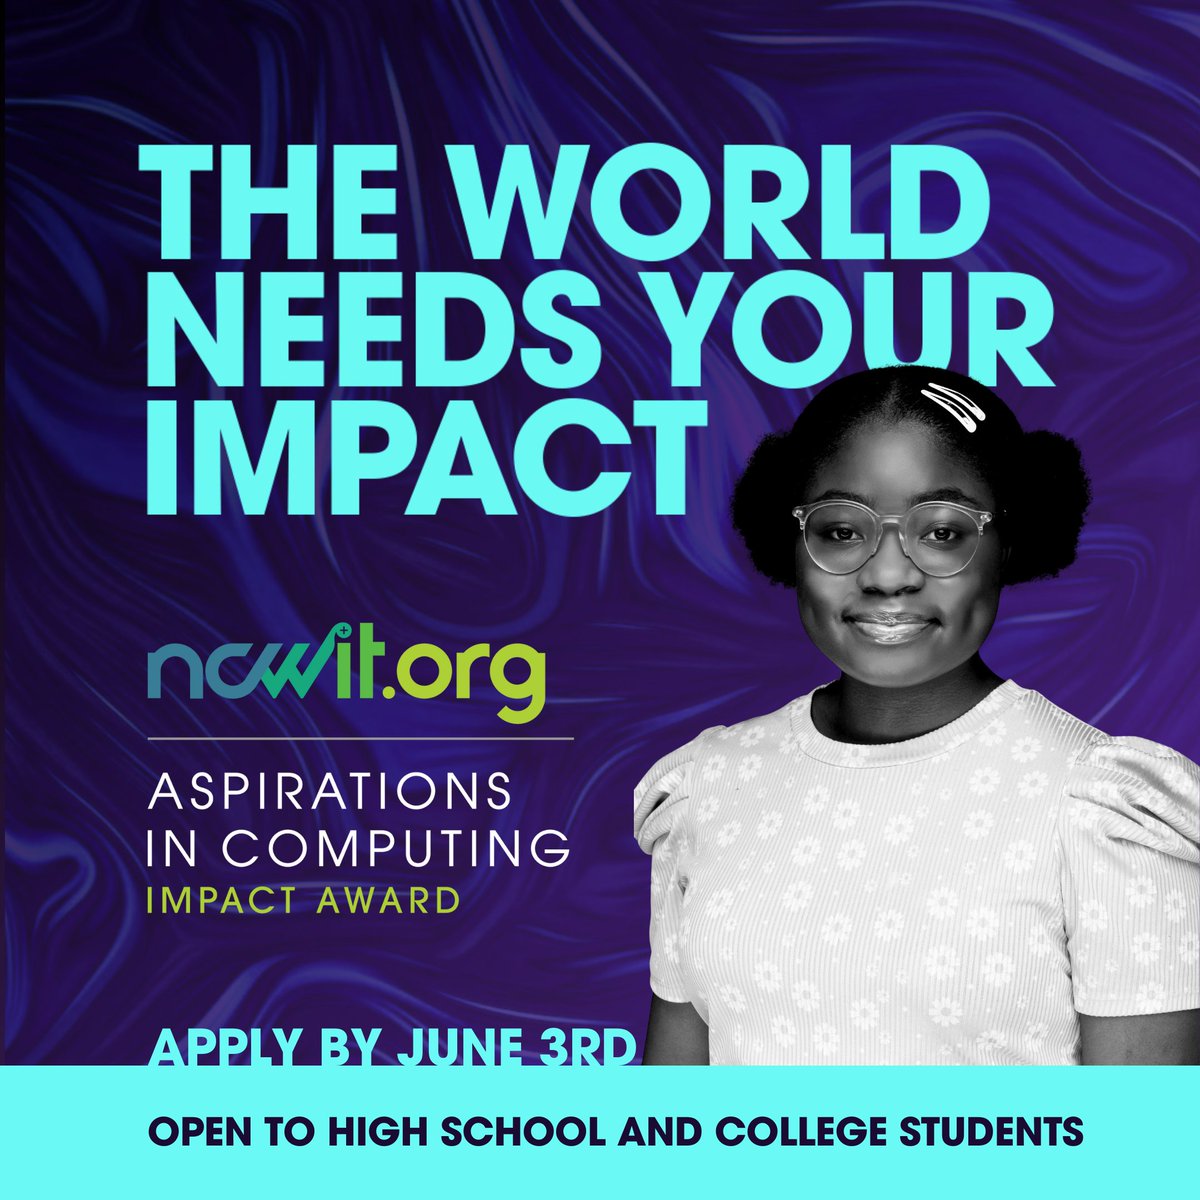 Change-making 2024 #NCWITAiC Impact Award winners receive: 💸 $500 — either for a person or 501c(3) non-profit organization 🏅 An Aspirations in Computing Impact Award certificate 🎆 Recognition on @NCWIT websites and social media Apply by June 3rd: aspirations.org/impactaward